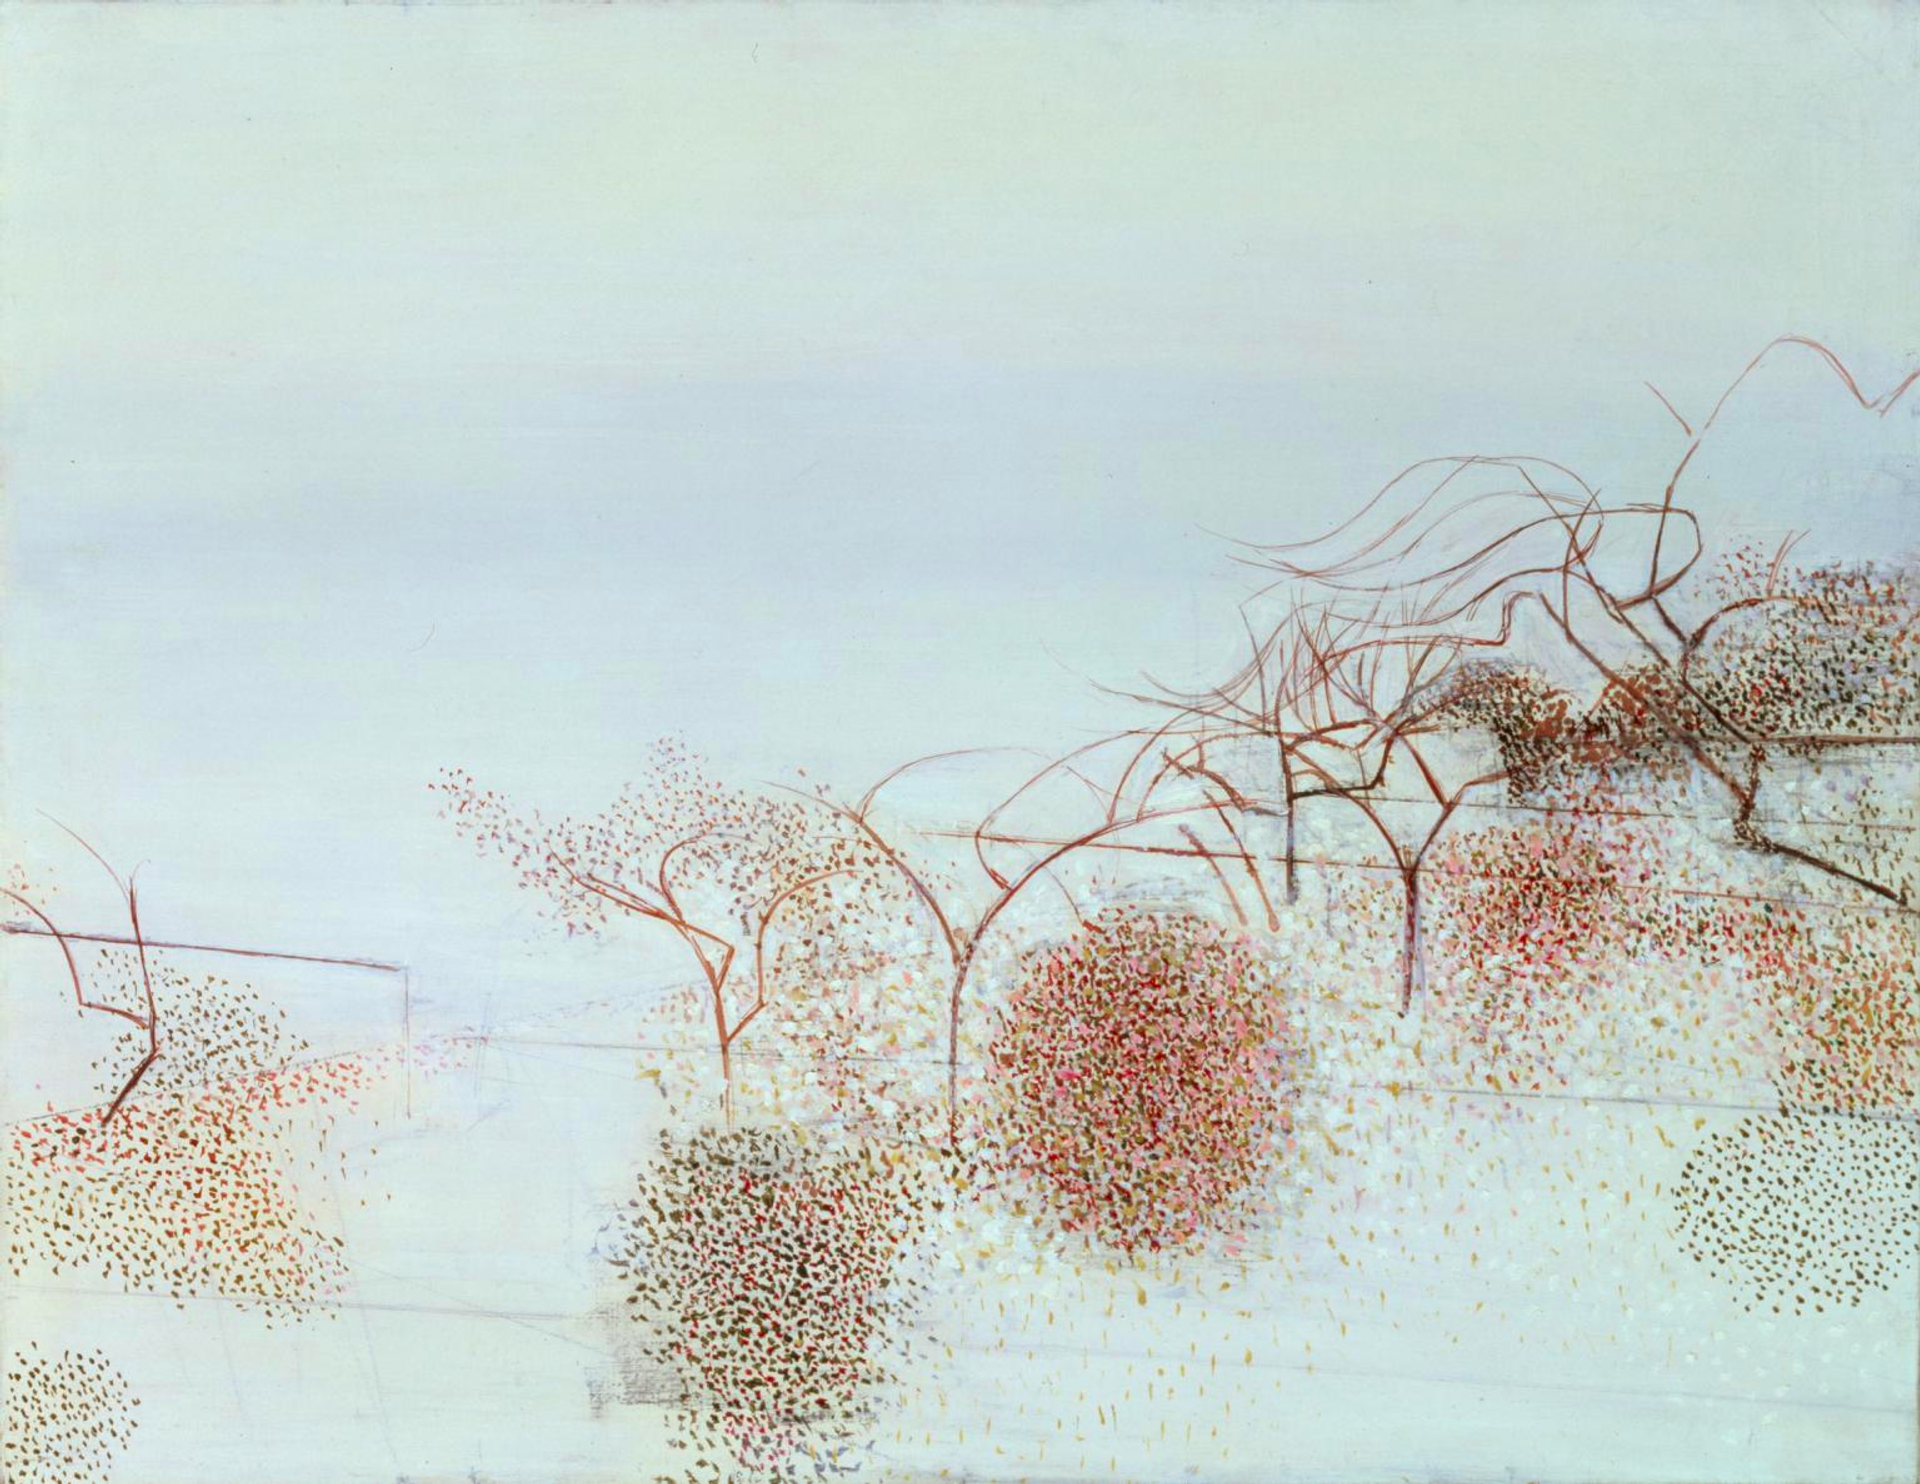 A white-washed landscape painting featuring an abstracted pointillist depiction of bare trees, their leafless branches lining the right edge of the artwork. The arrangement of the trees creates a fluctuating sense of depth, while pointillist dots below each tree suggest fallen leaves.